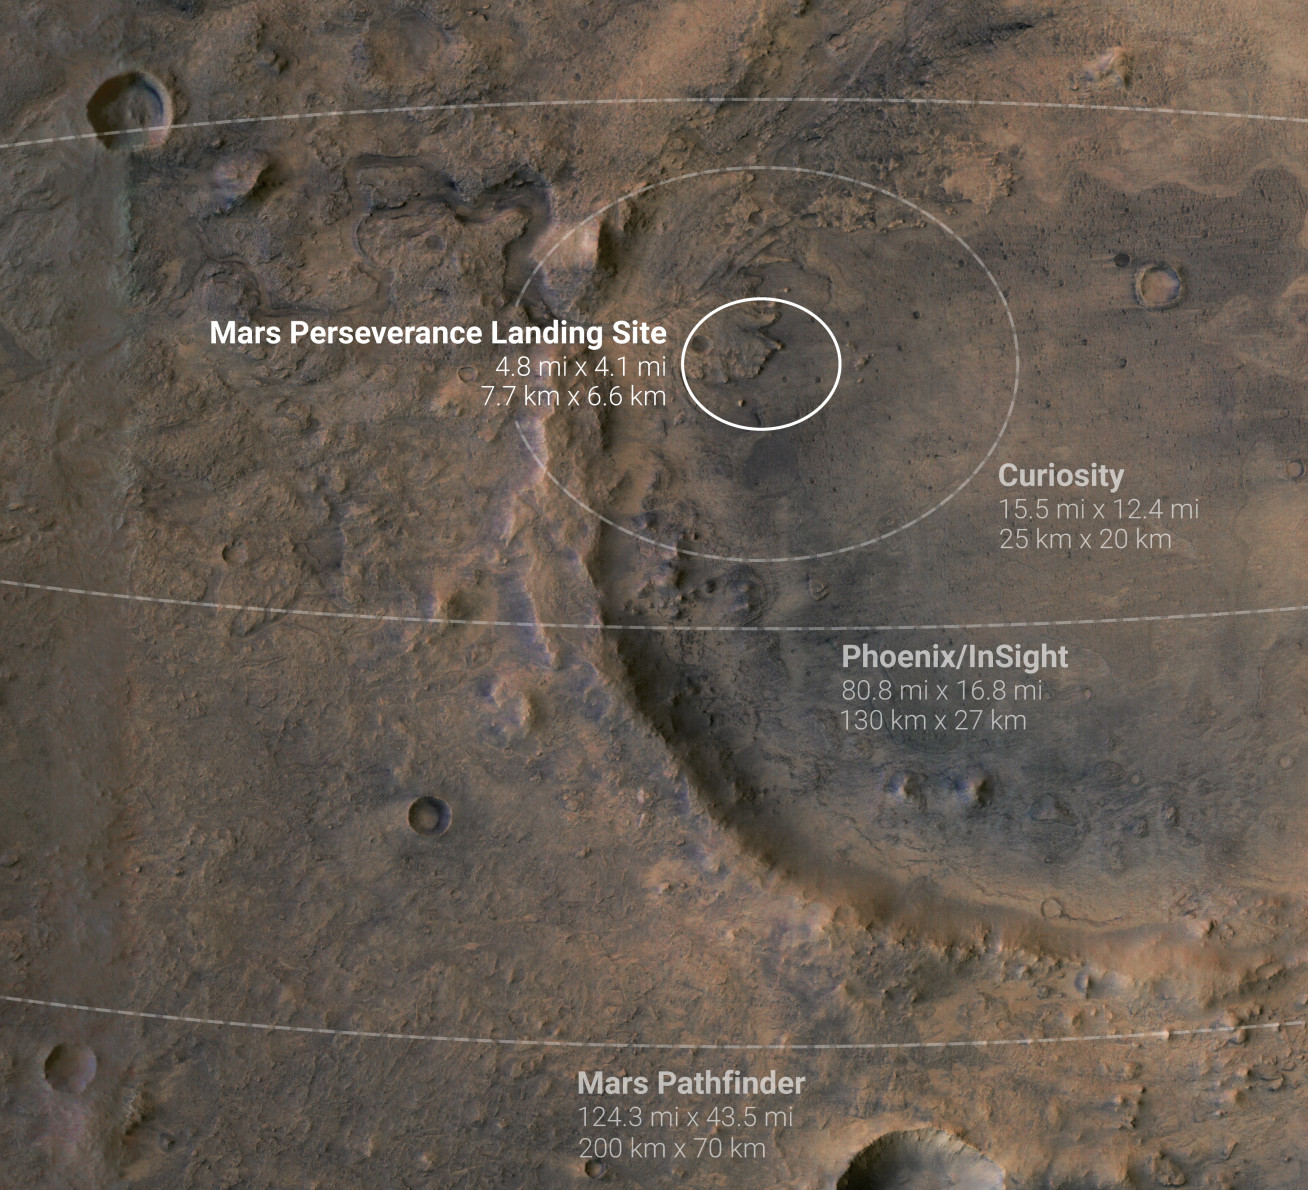 The target landing area of NASA’s Perseverance rover is overlaid on this image of its landing site on Mars, Jezero Crater. The larger landing ellipses of several other Mars missions are shown for comparison.